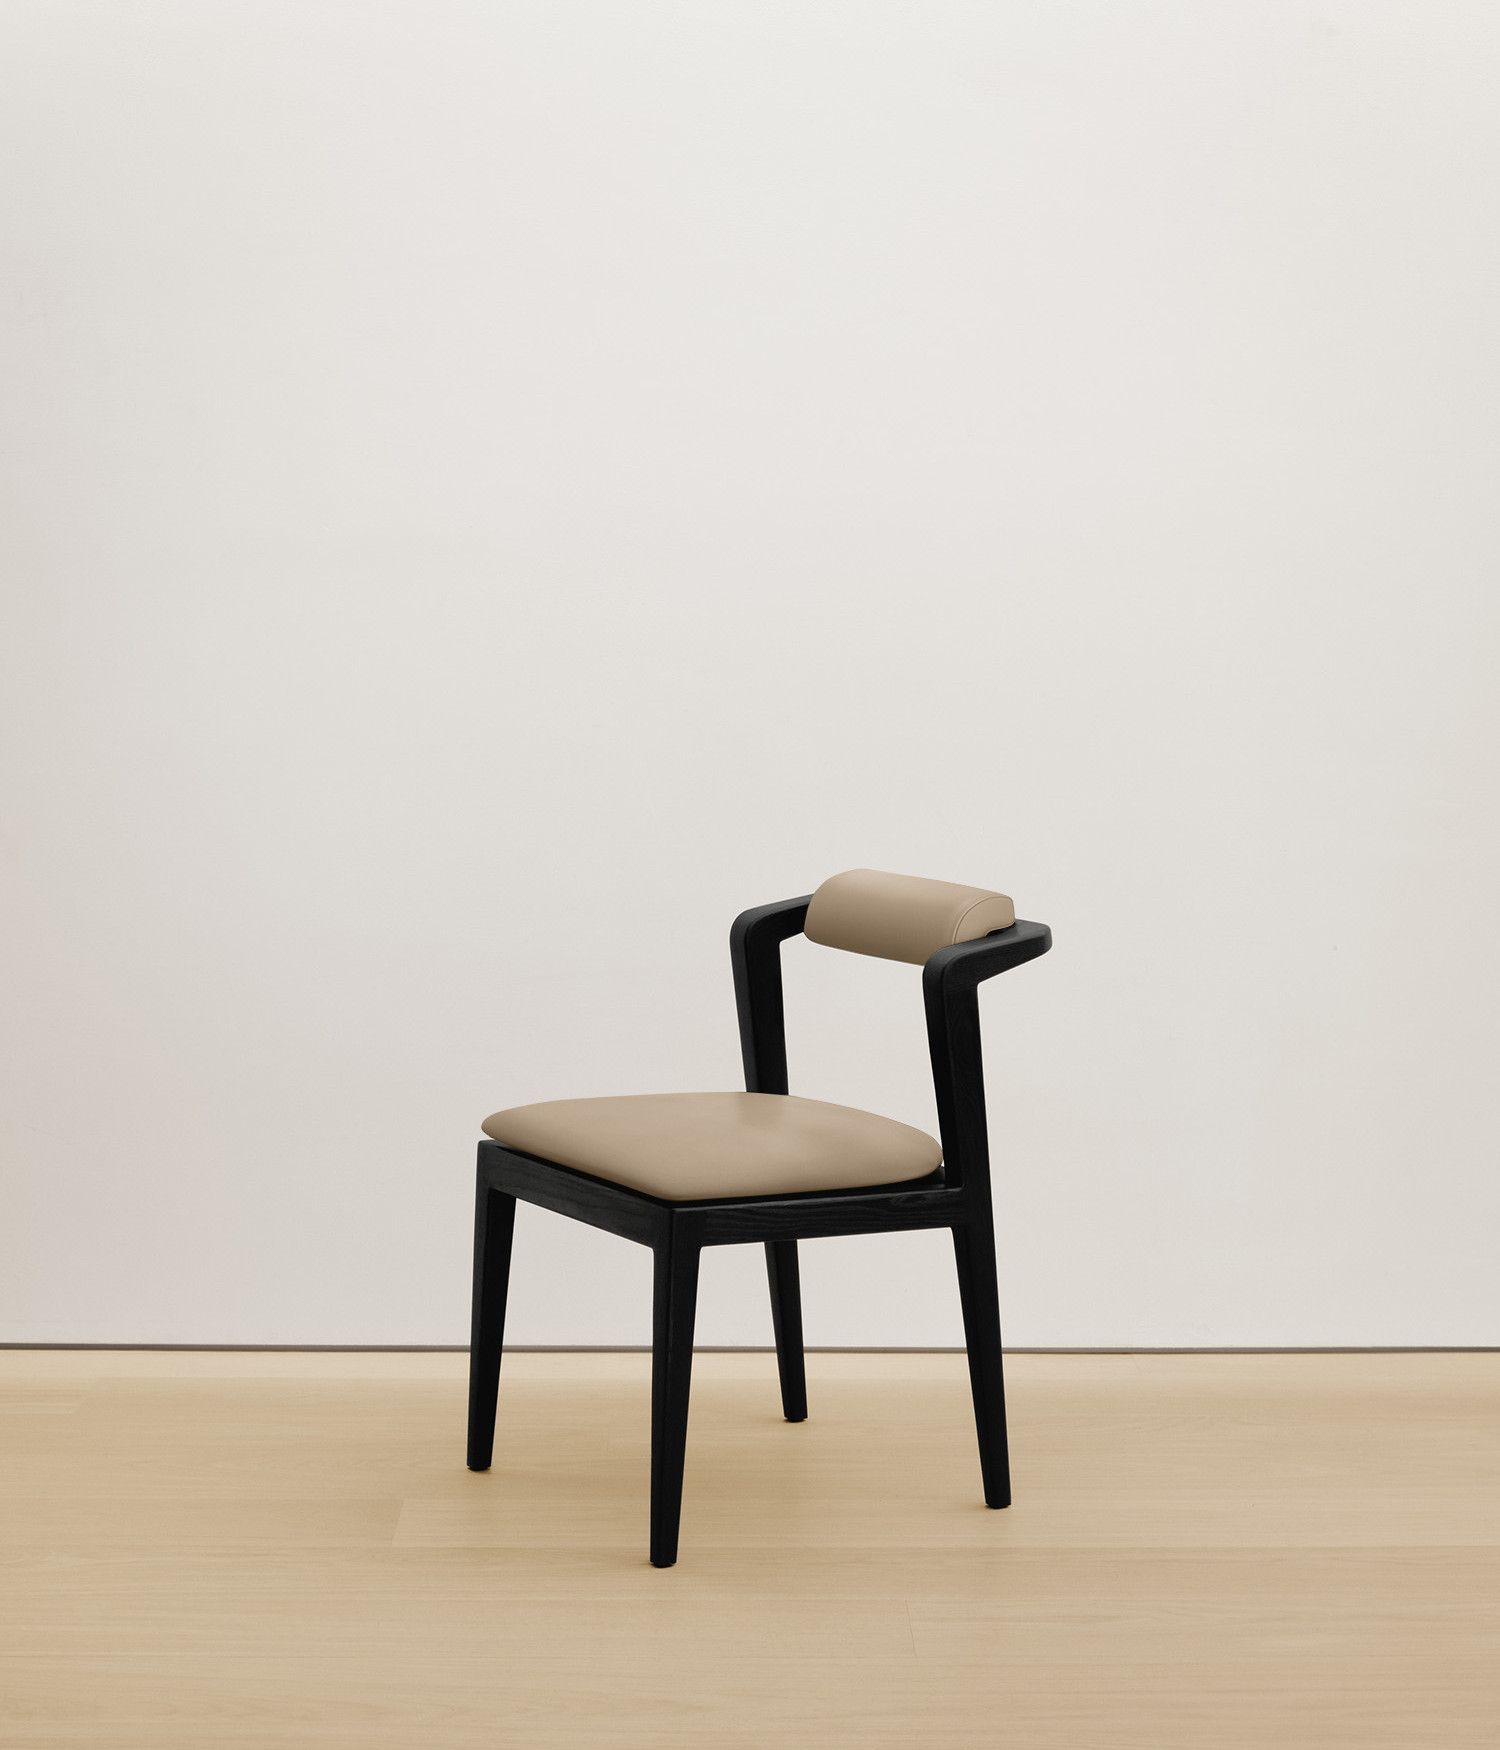  black-stained-oak chair with cream color upholstered seat 